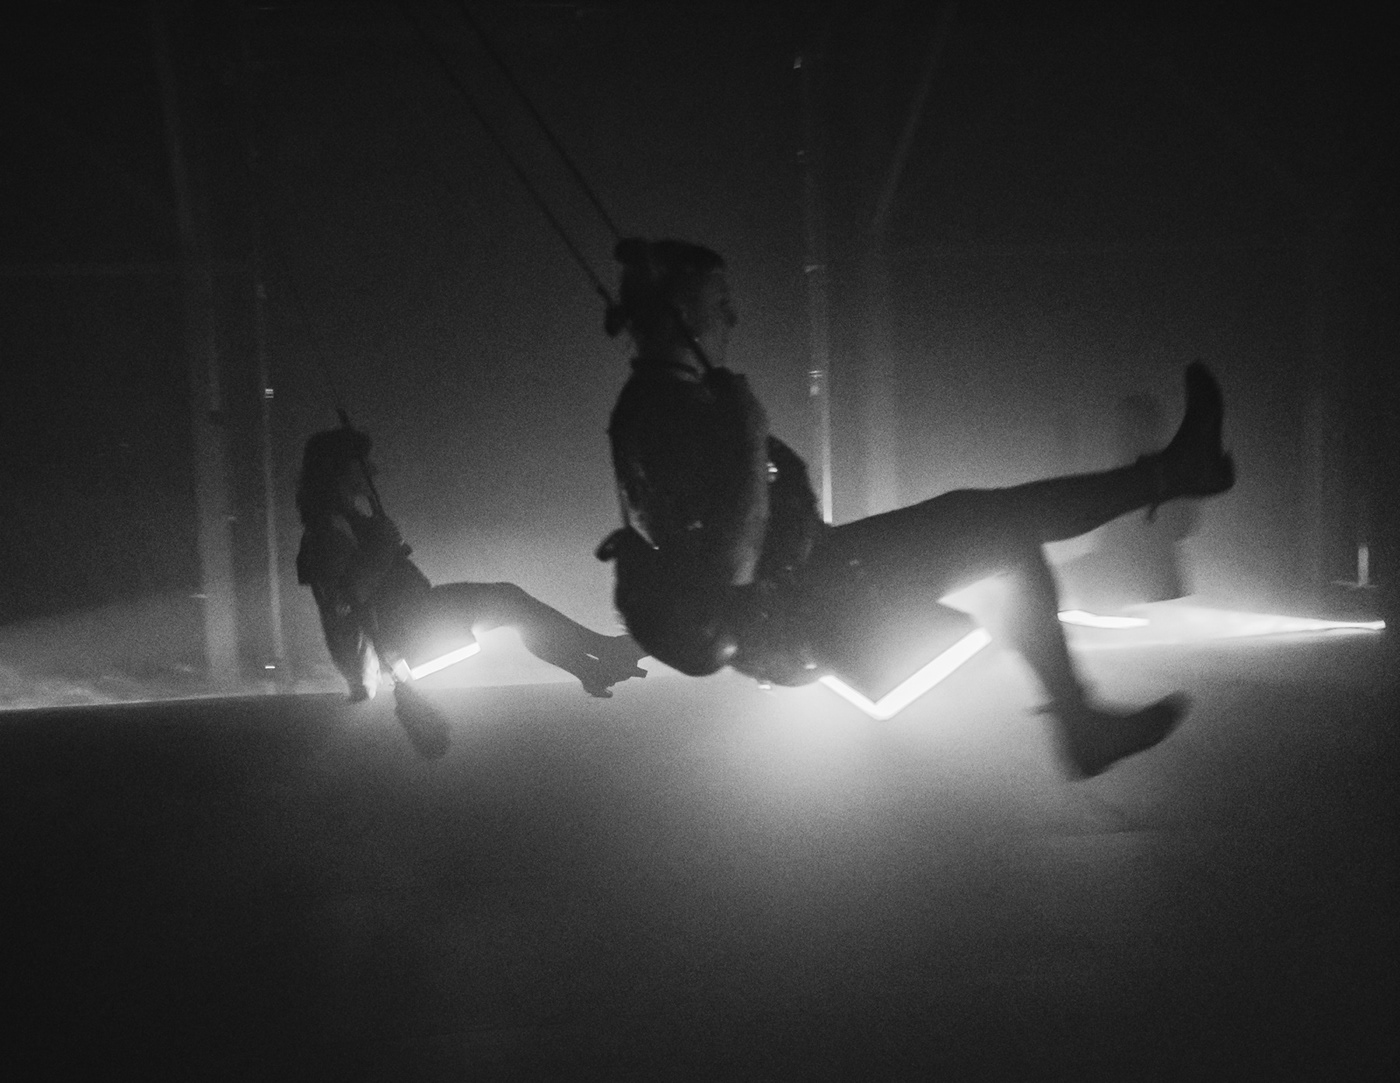 environment immersive party swings